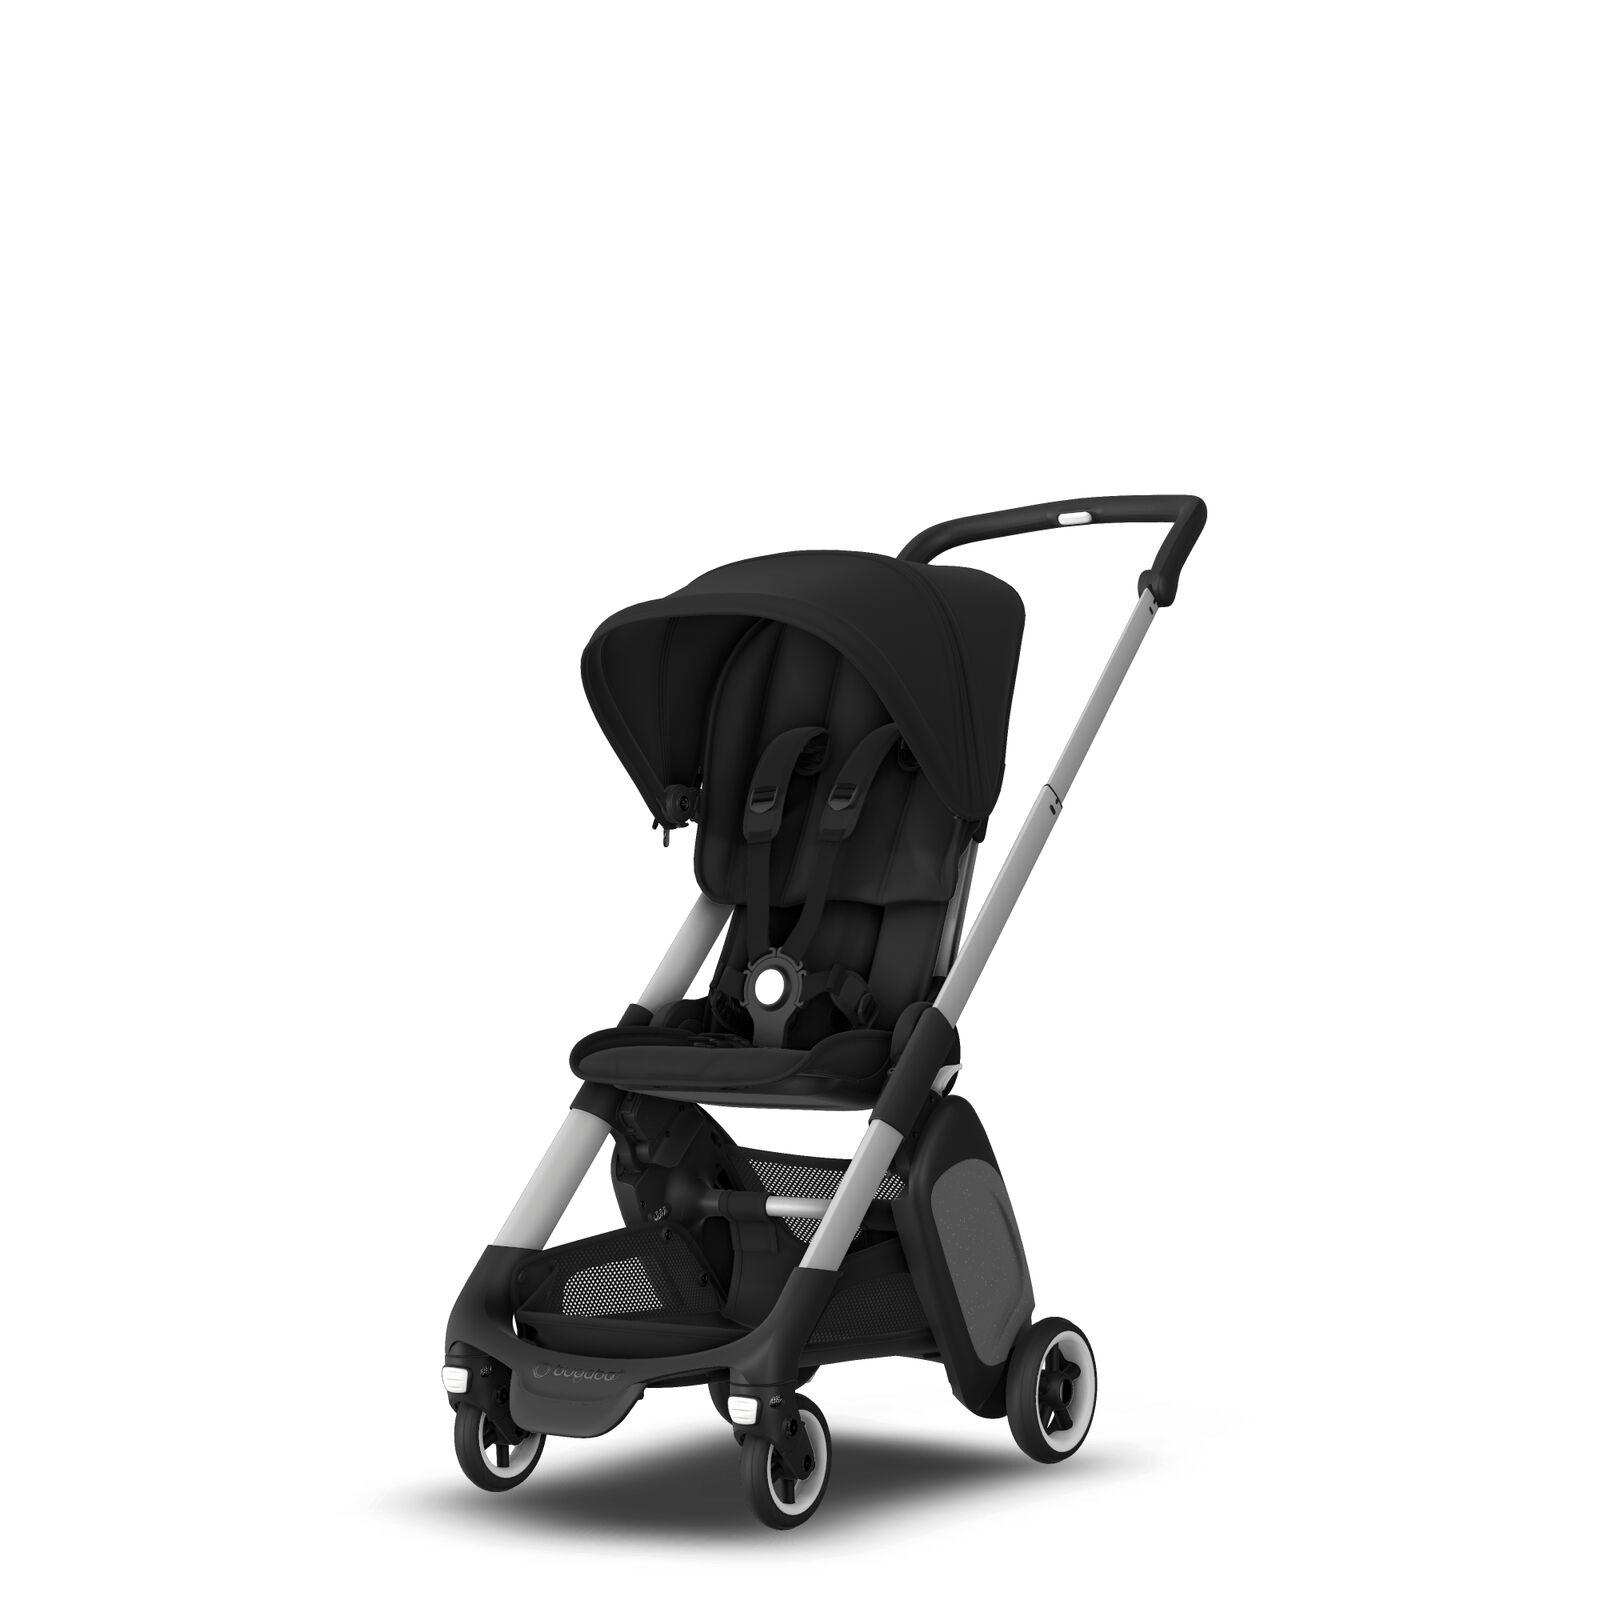 Bugaboo Ant ultra compact stroller - View 5